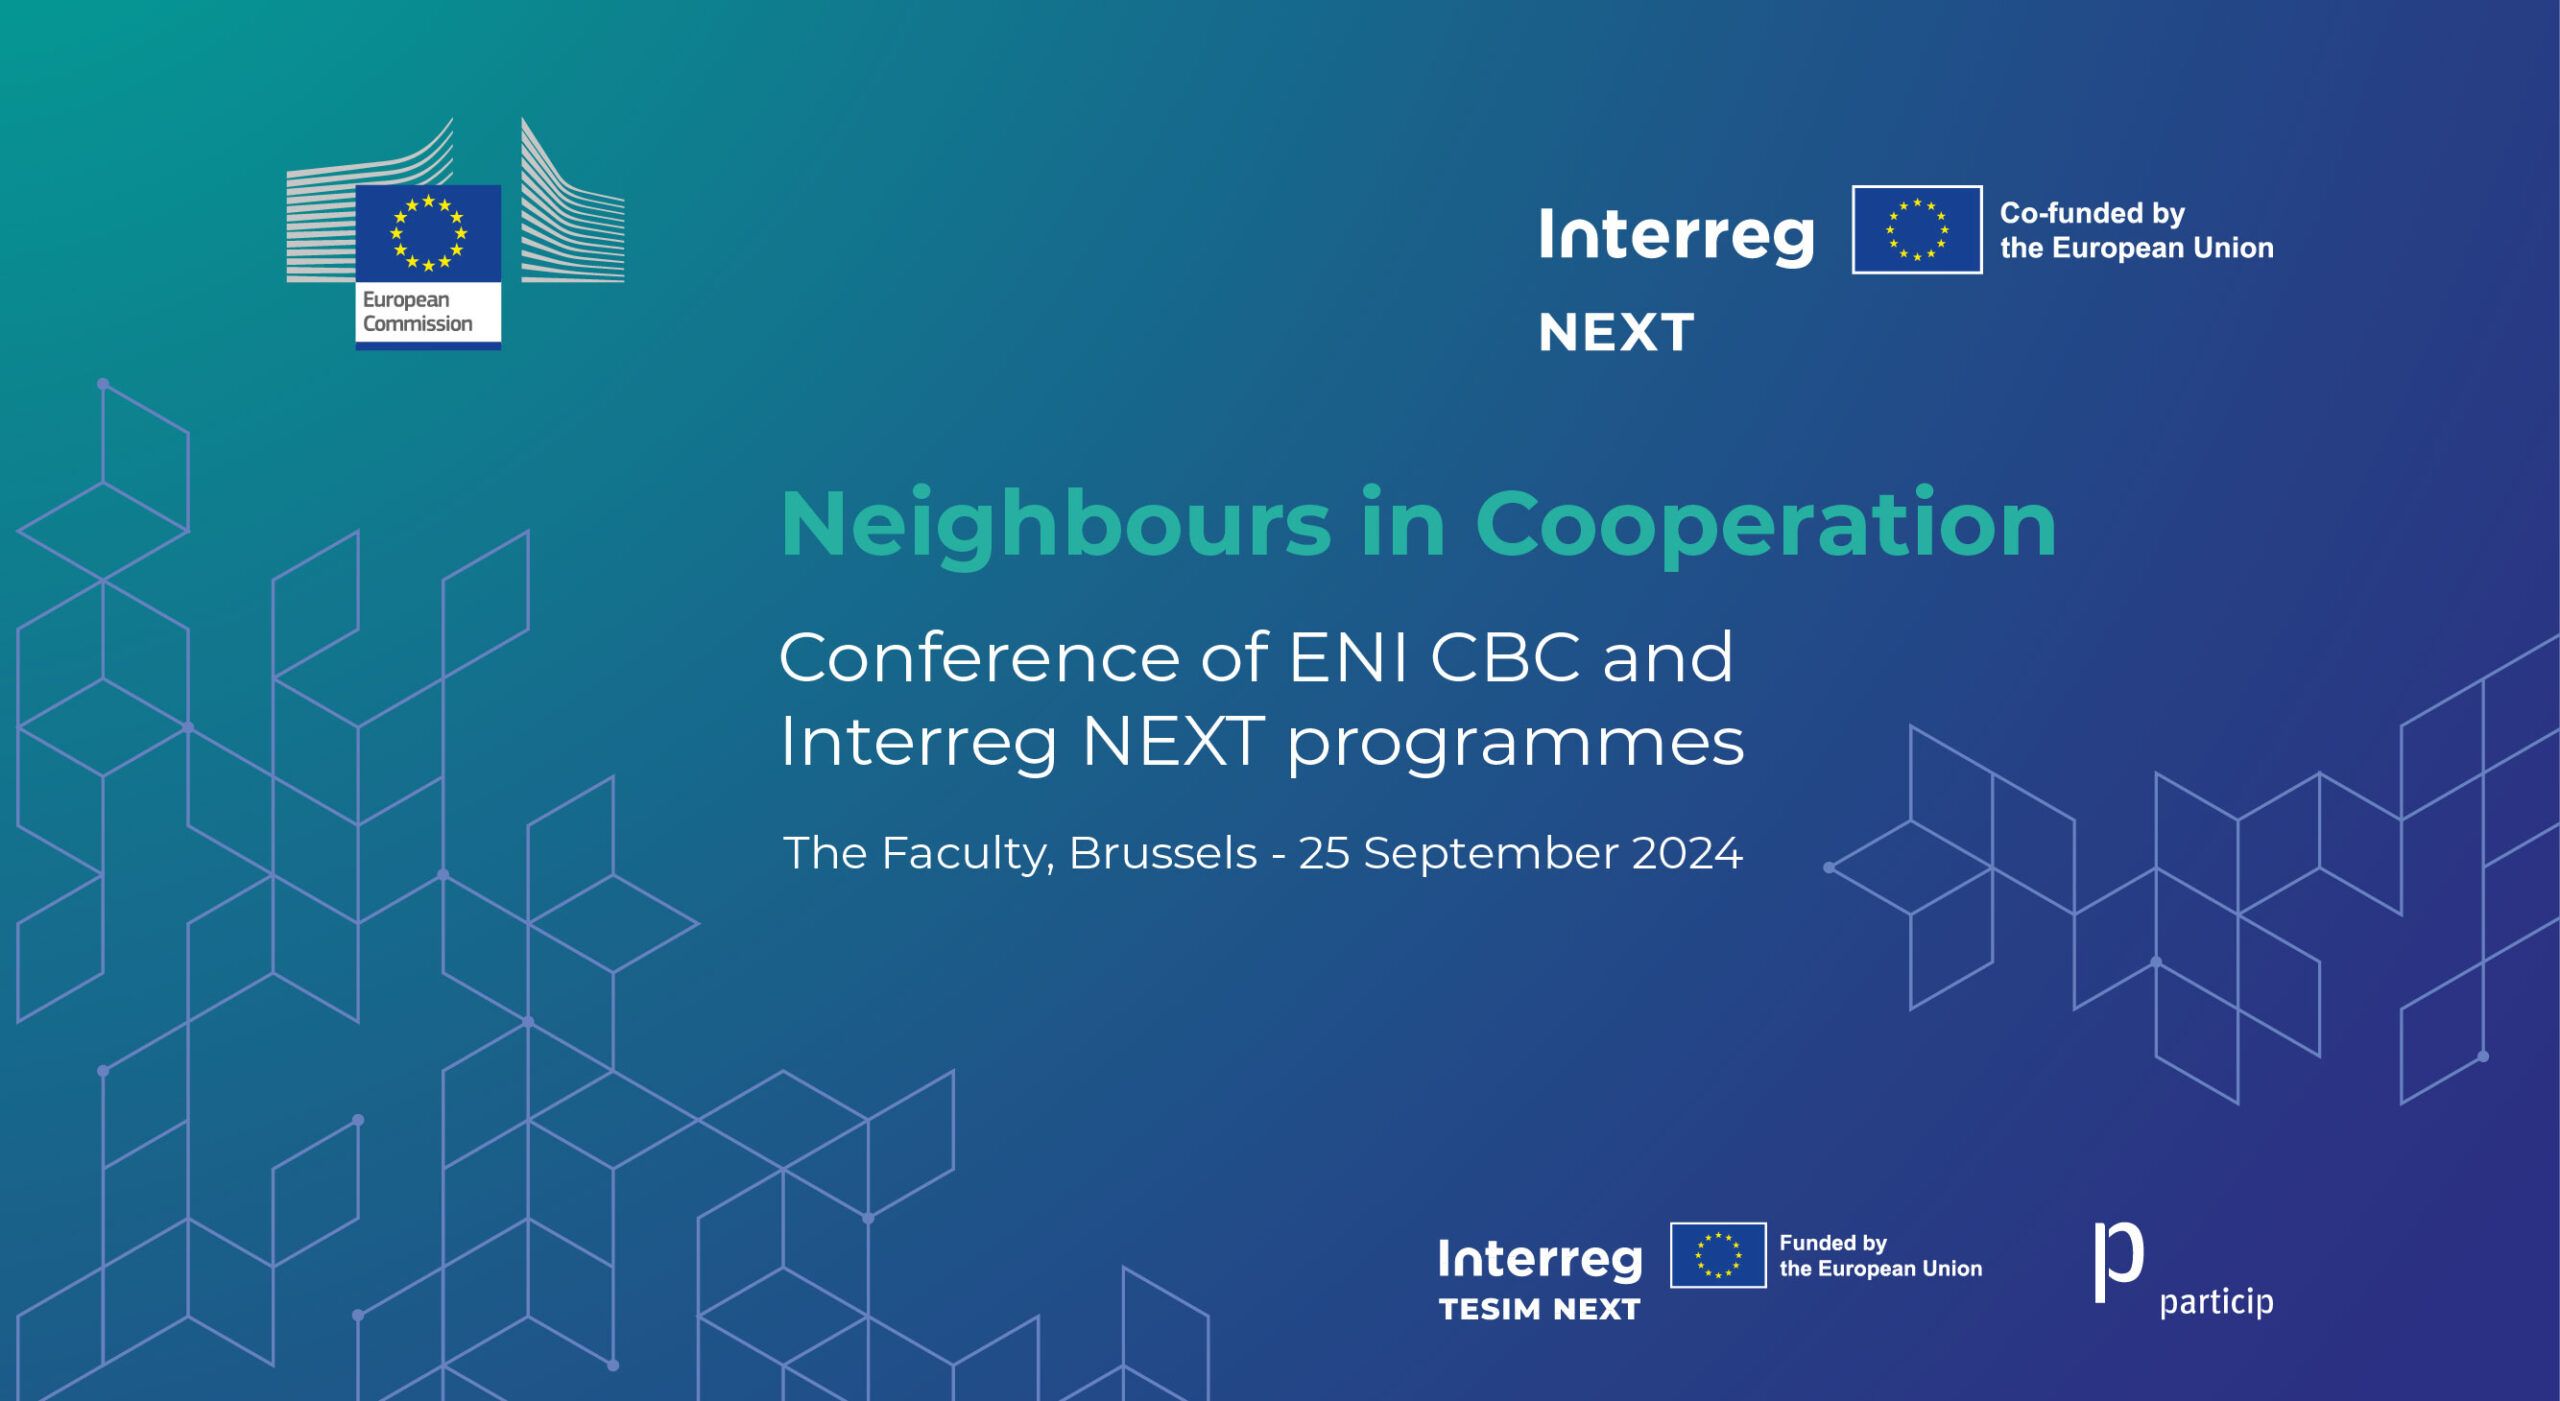 Conference of ENI CBC and Interreg NEXT programmes